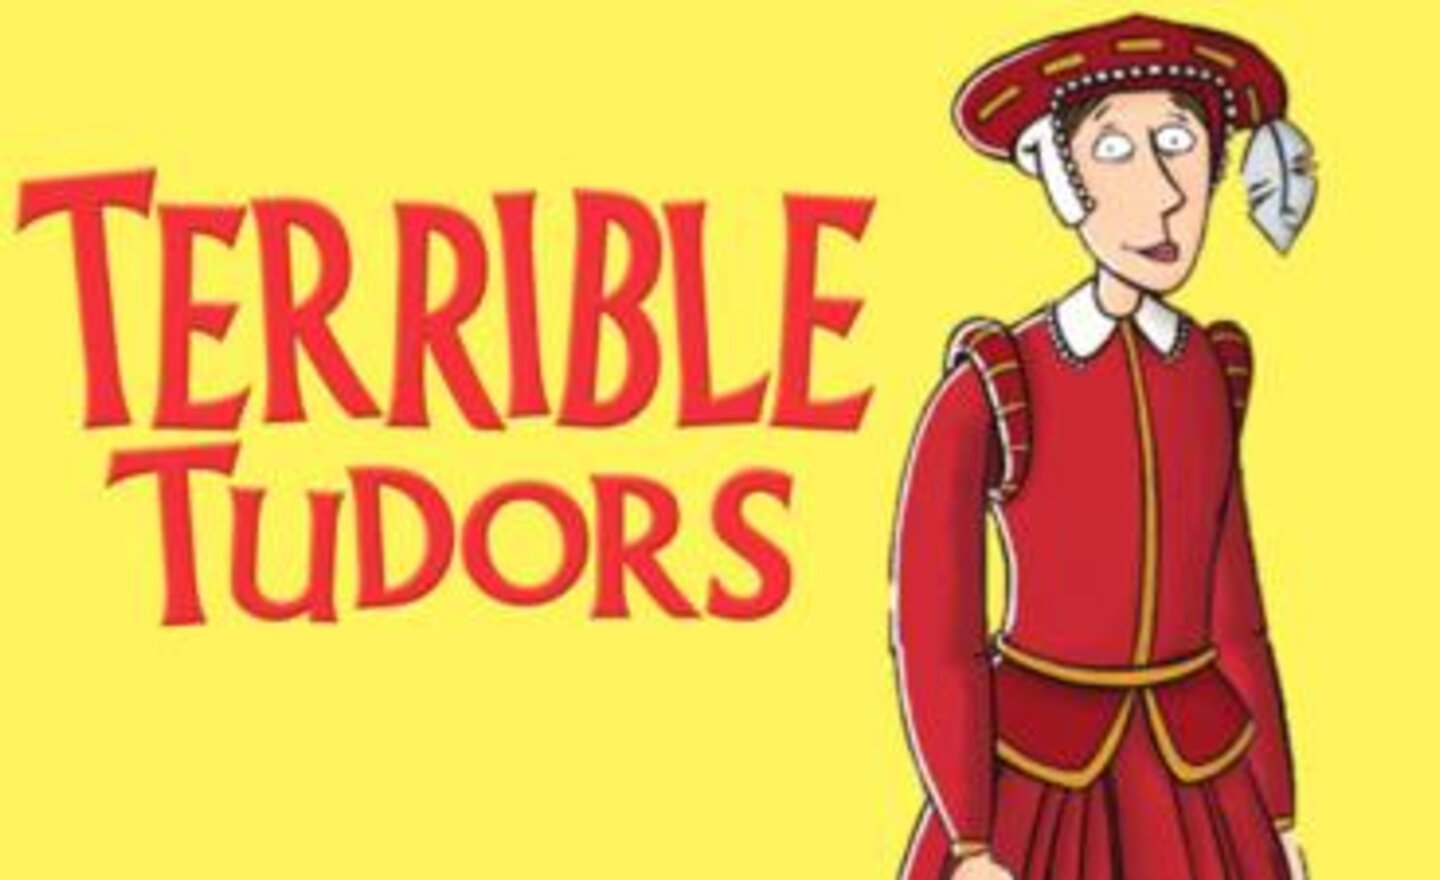 Image of Were the Tudors really that terrible?